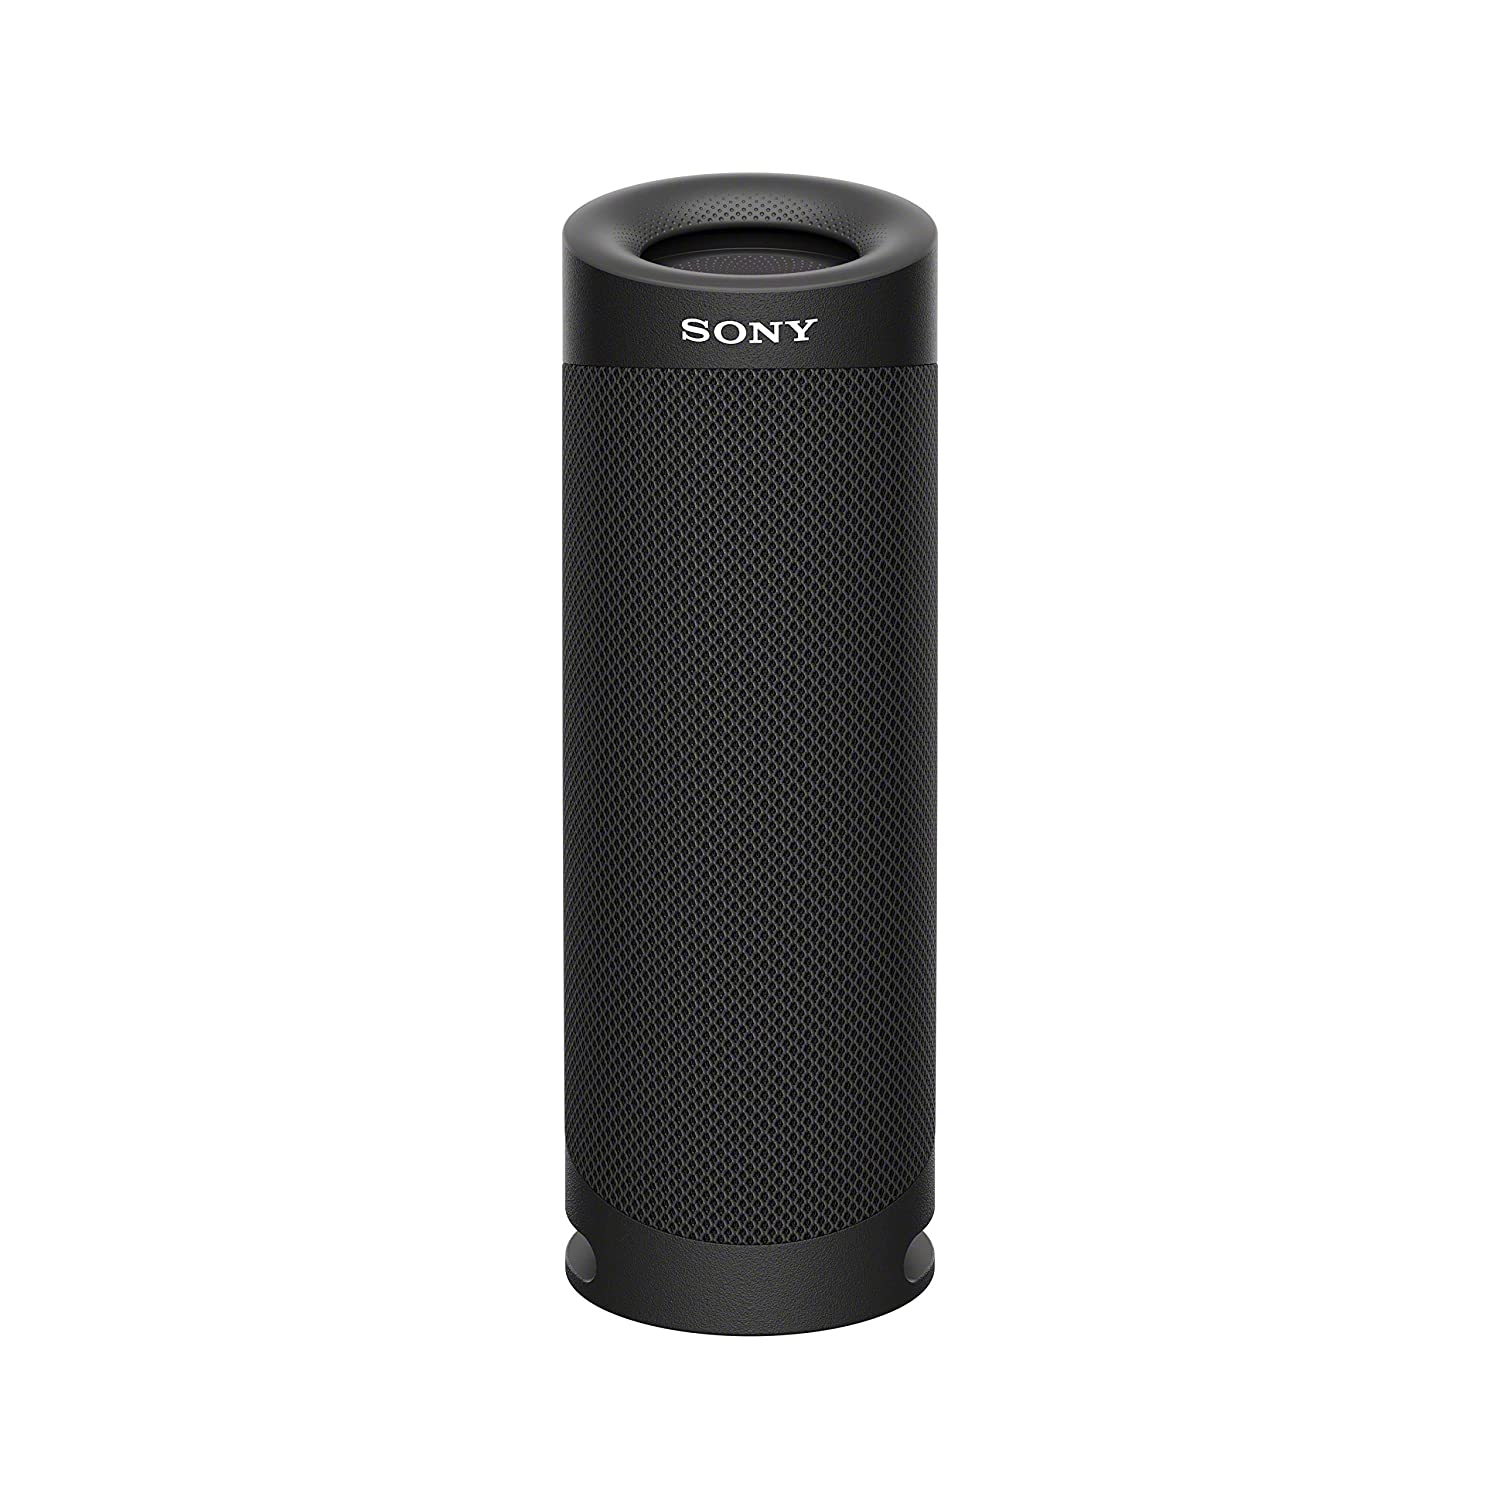 Sony SRS-XB23 Wireless Extra Bass Bluetooth Speaker with 12 Hours Battery Life, Party Connect, Waterproof, Dustproof, Rustproof, Speaker with Mic, Loud Audio for Phone Call